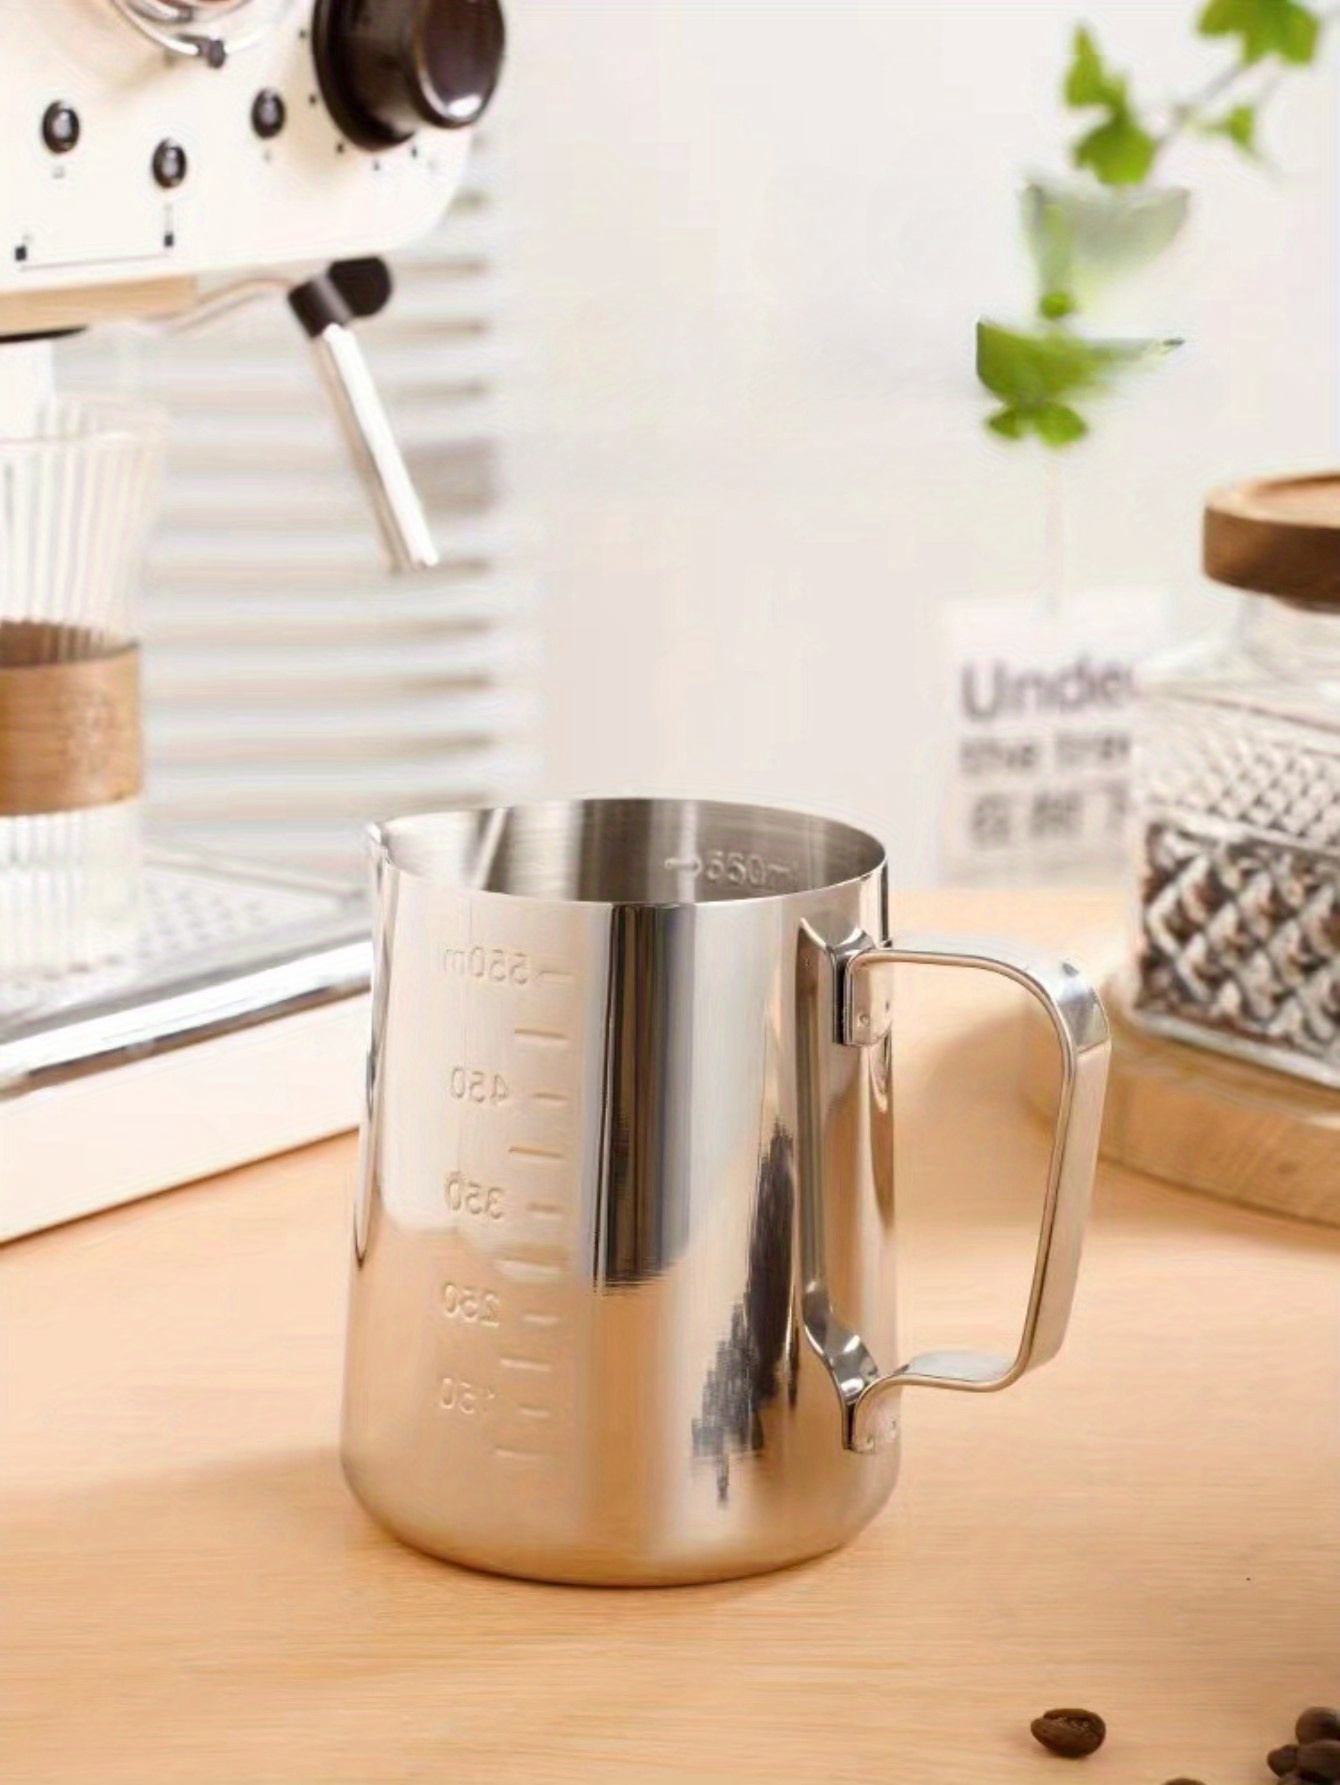 Milk Frothing Pitcher, Stainless Steel Art Creamer Cup Milk Frother Steamer  Cup Stainless Steel Coffee Milk Frothing Cup,Coffee Steaming Pitcher